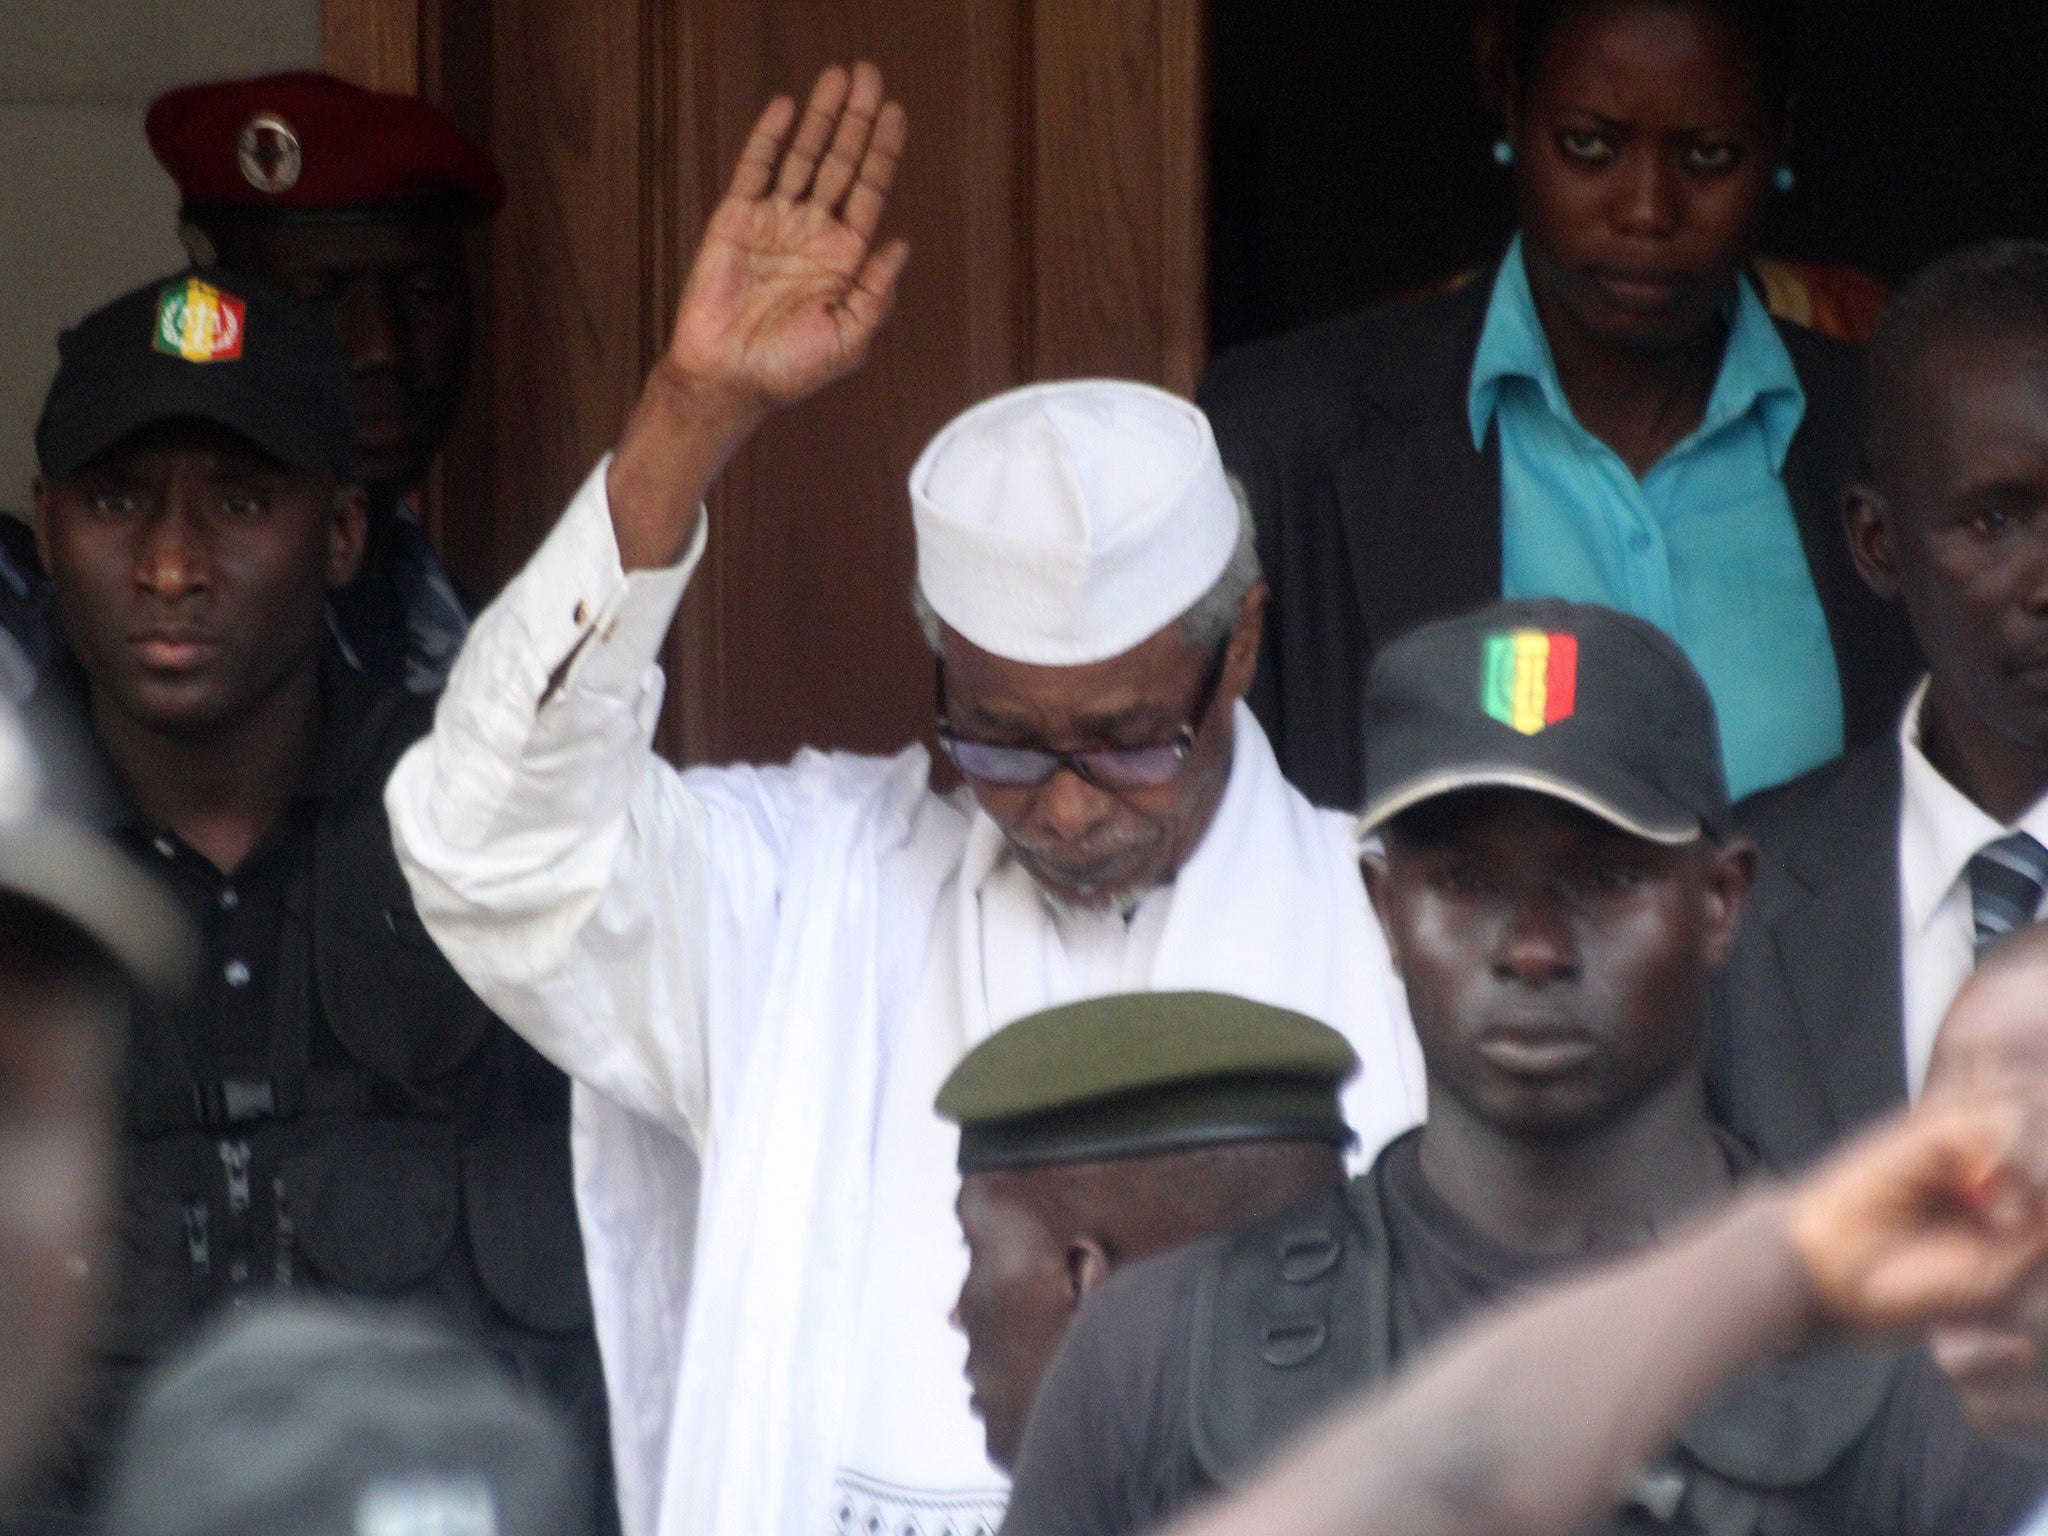 Former Chadian dictator Hissene Habre is escorted by military officers after being heard by a judge on July 2, 2013 in Dakar.